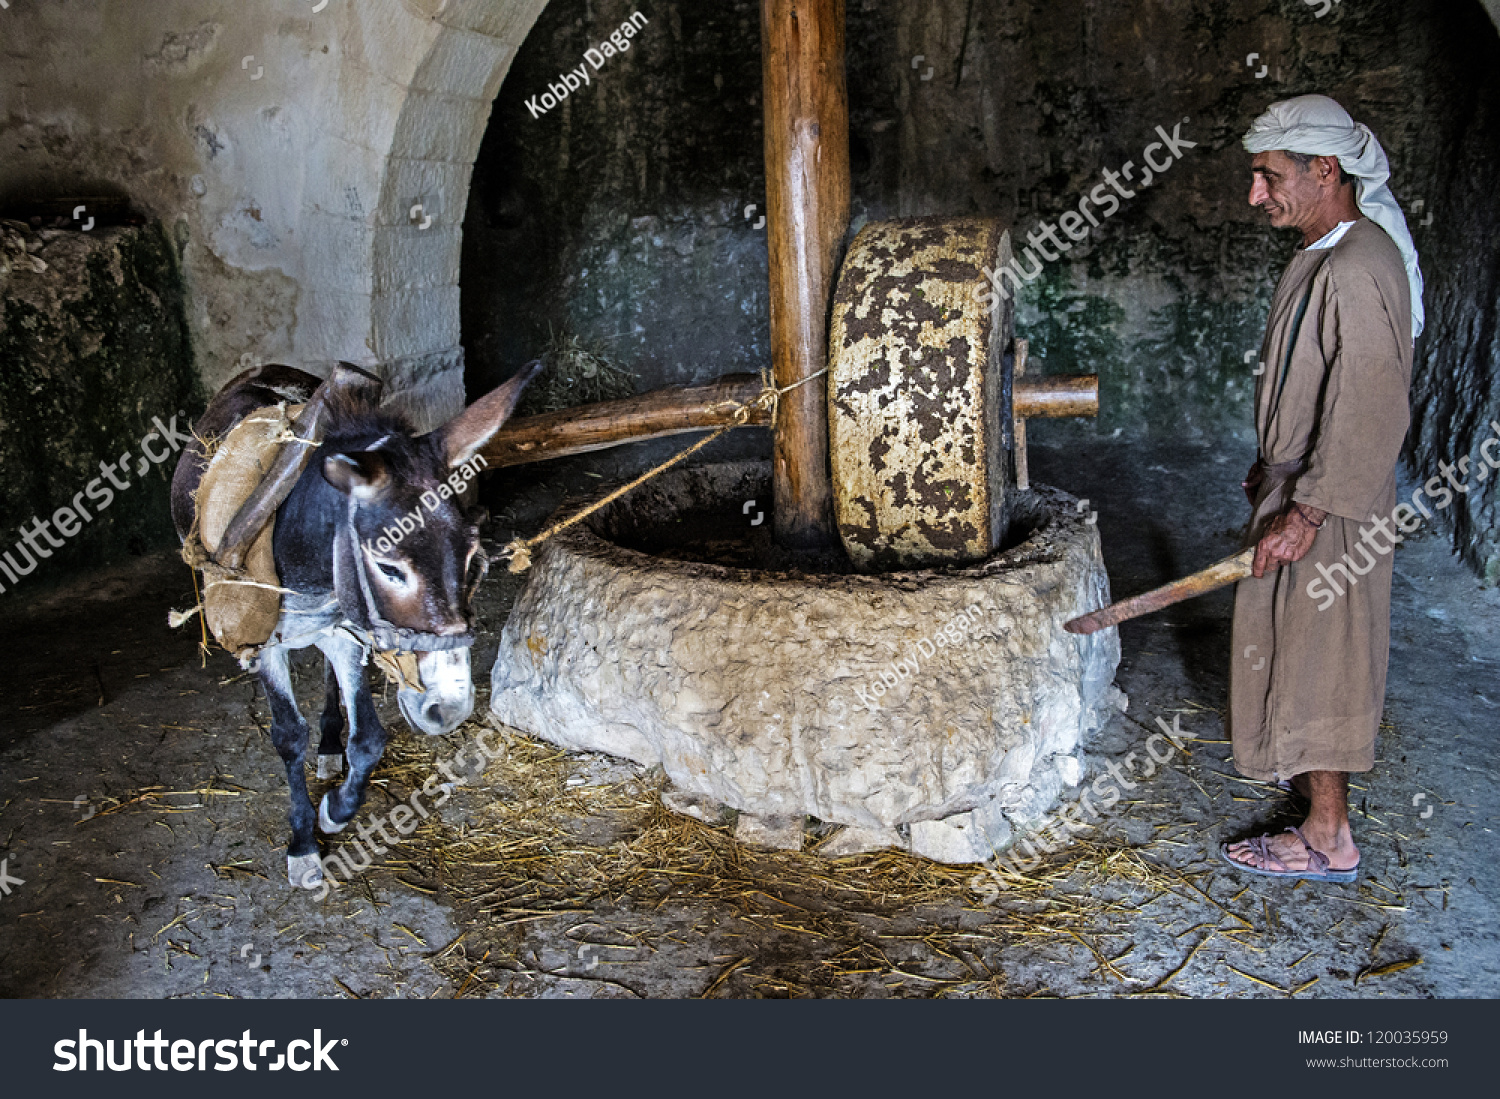 stock-photo-nazareth-israel-oct-millstone-donkey-used-for-pressing-olives-to-make-olive-oil-in-120035959.jpg